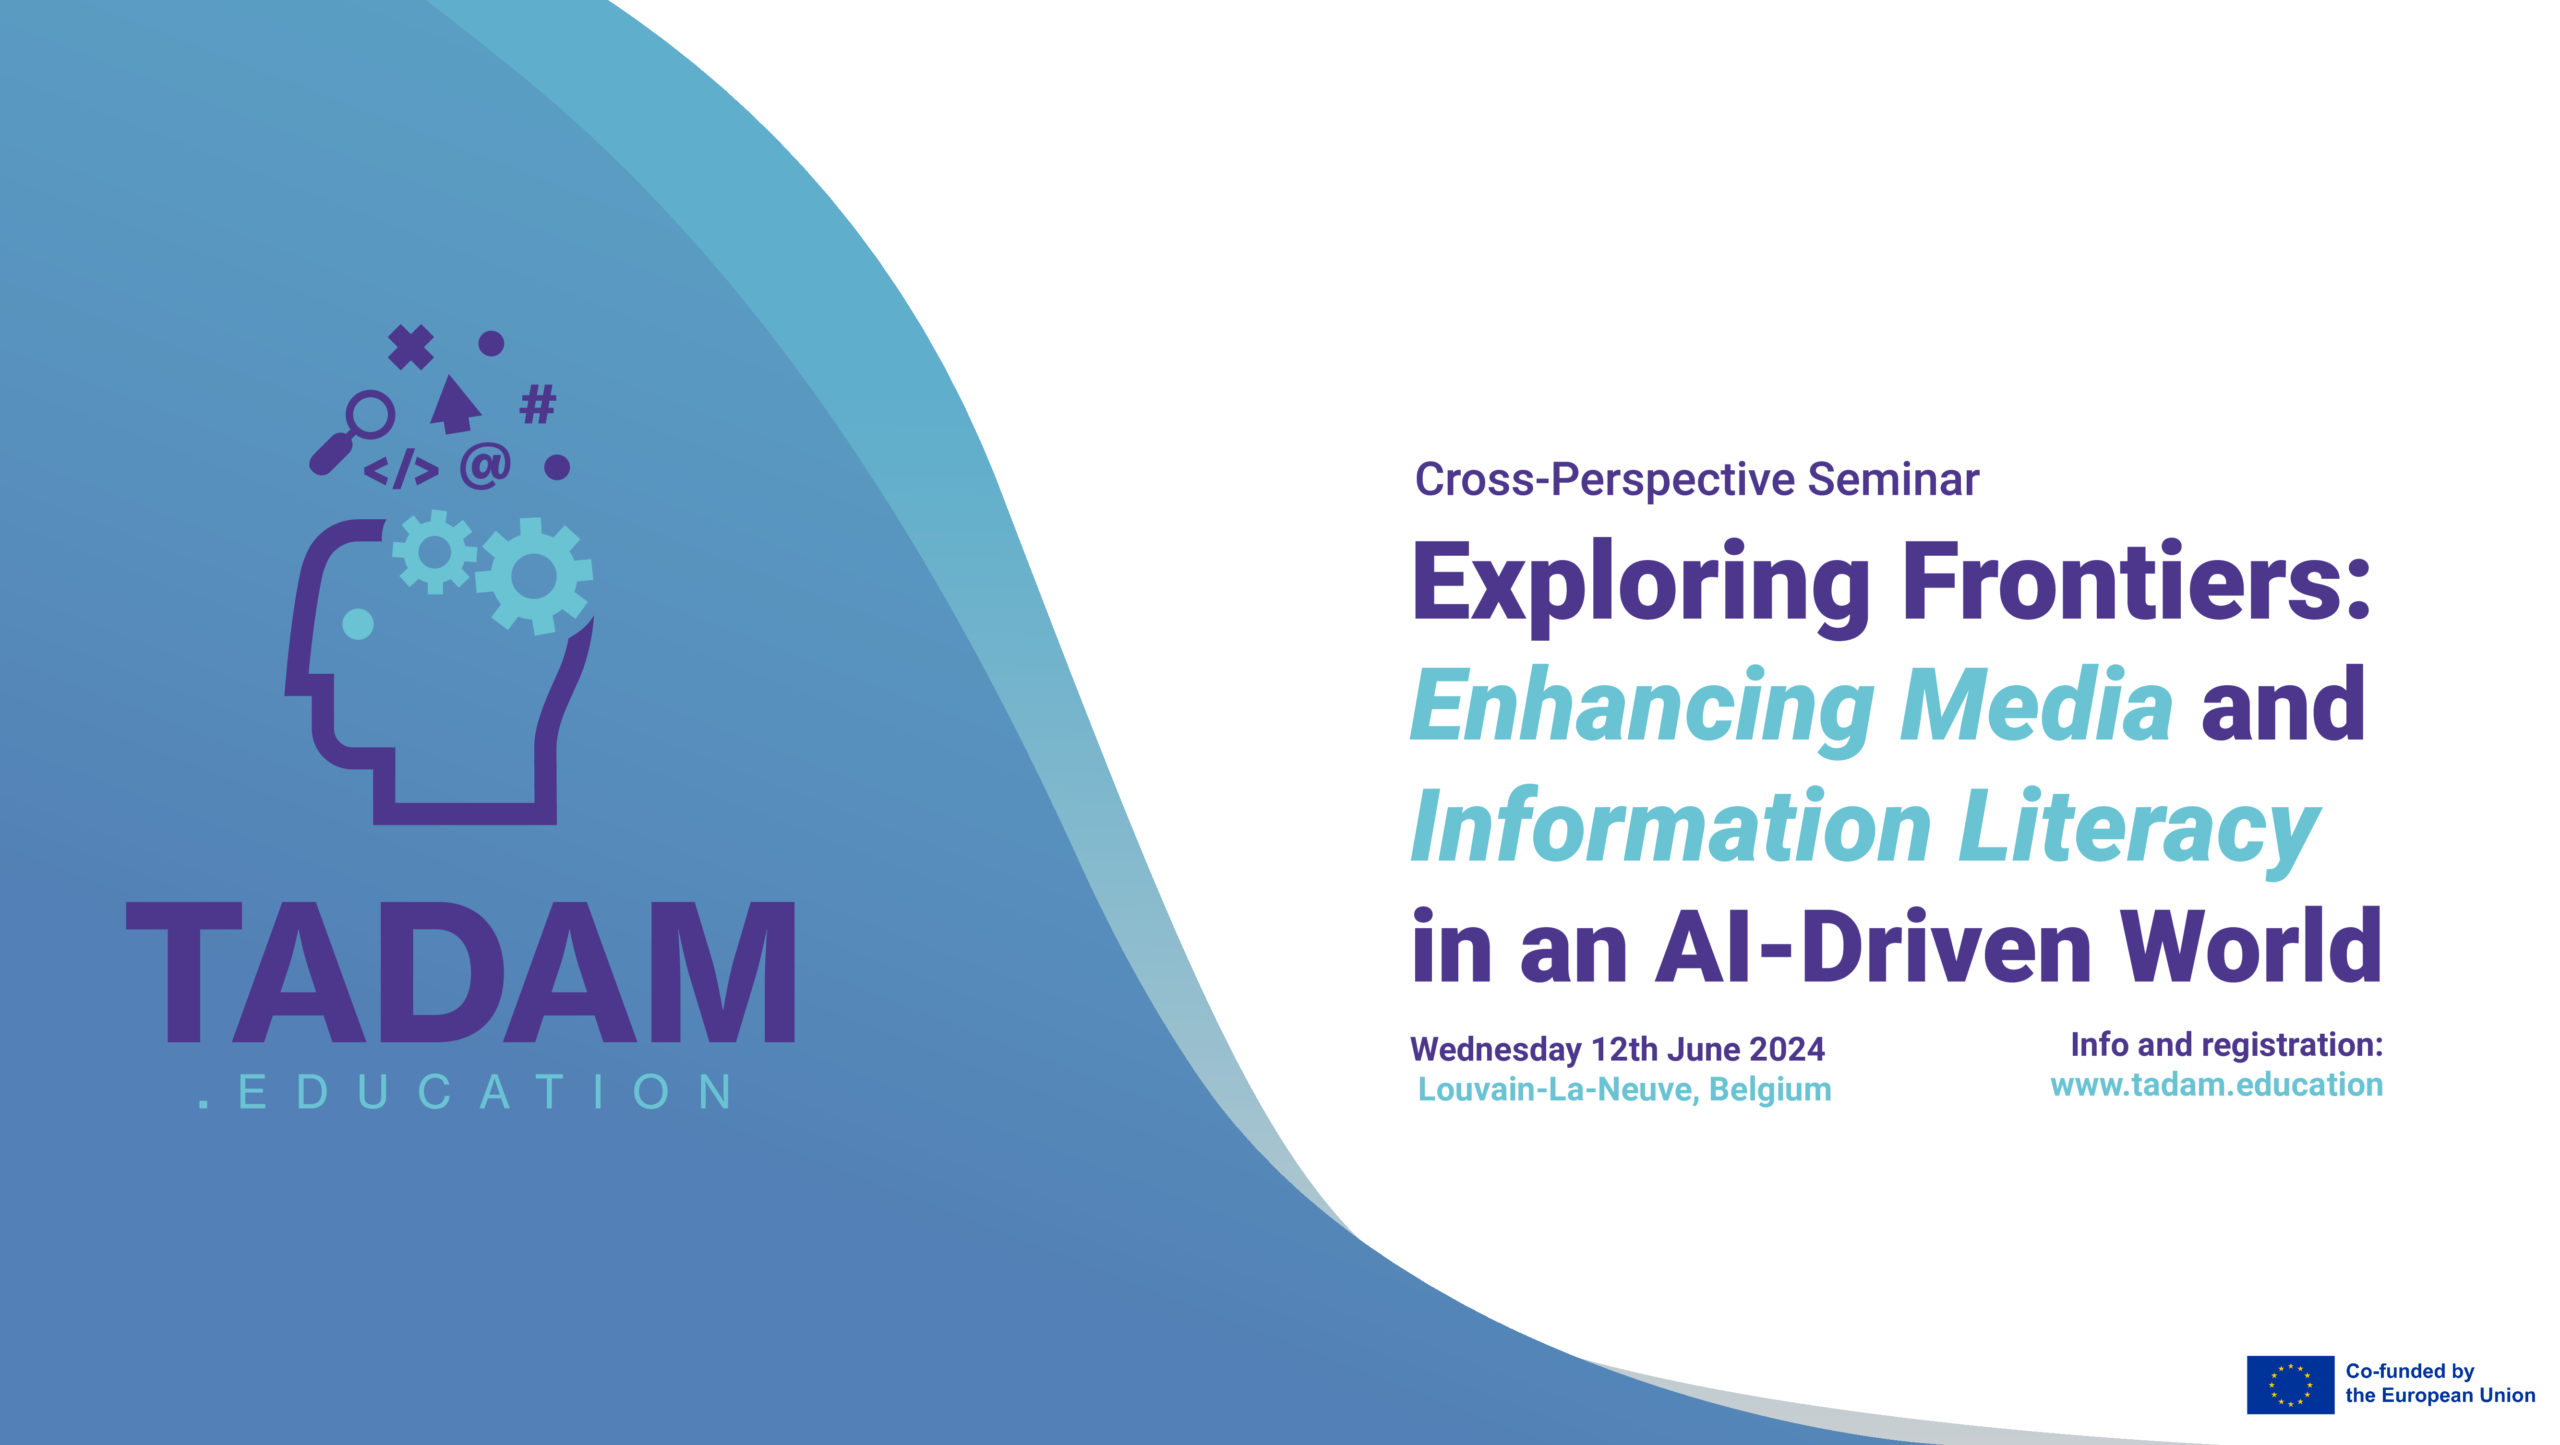 Want to discuss the challenges of AI? Join the TADAM Seminar